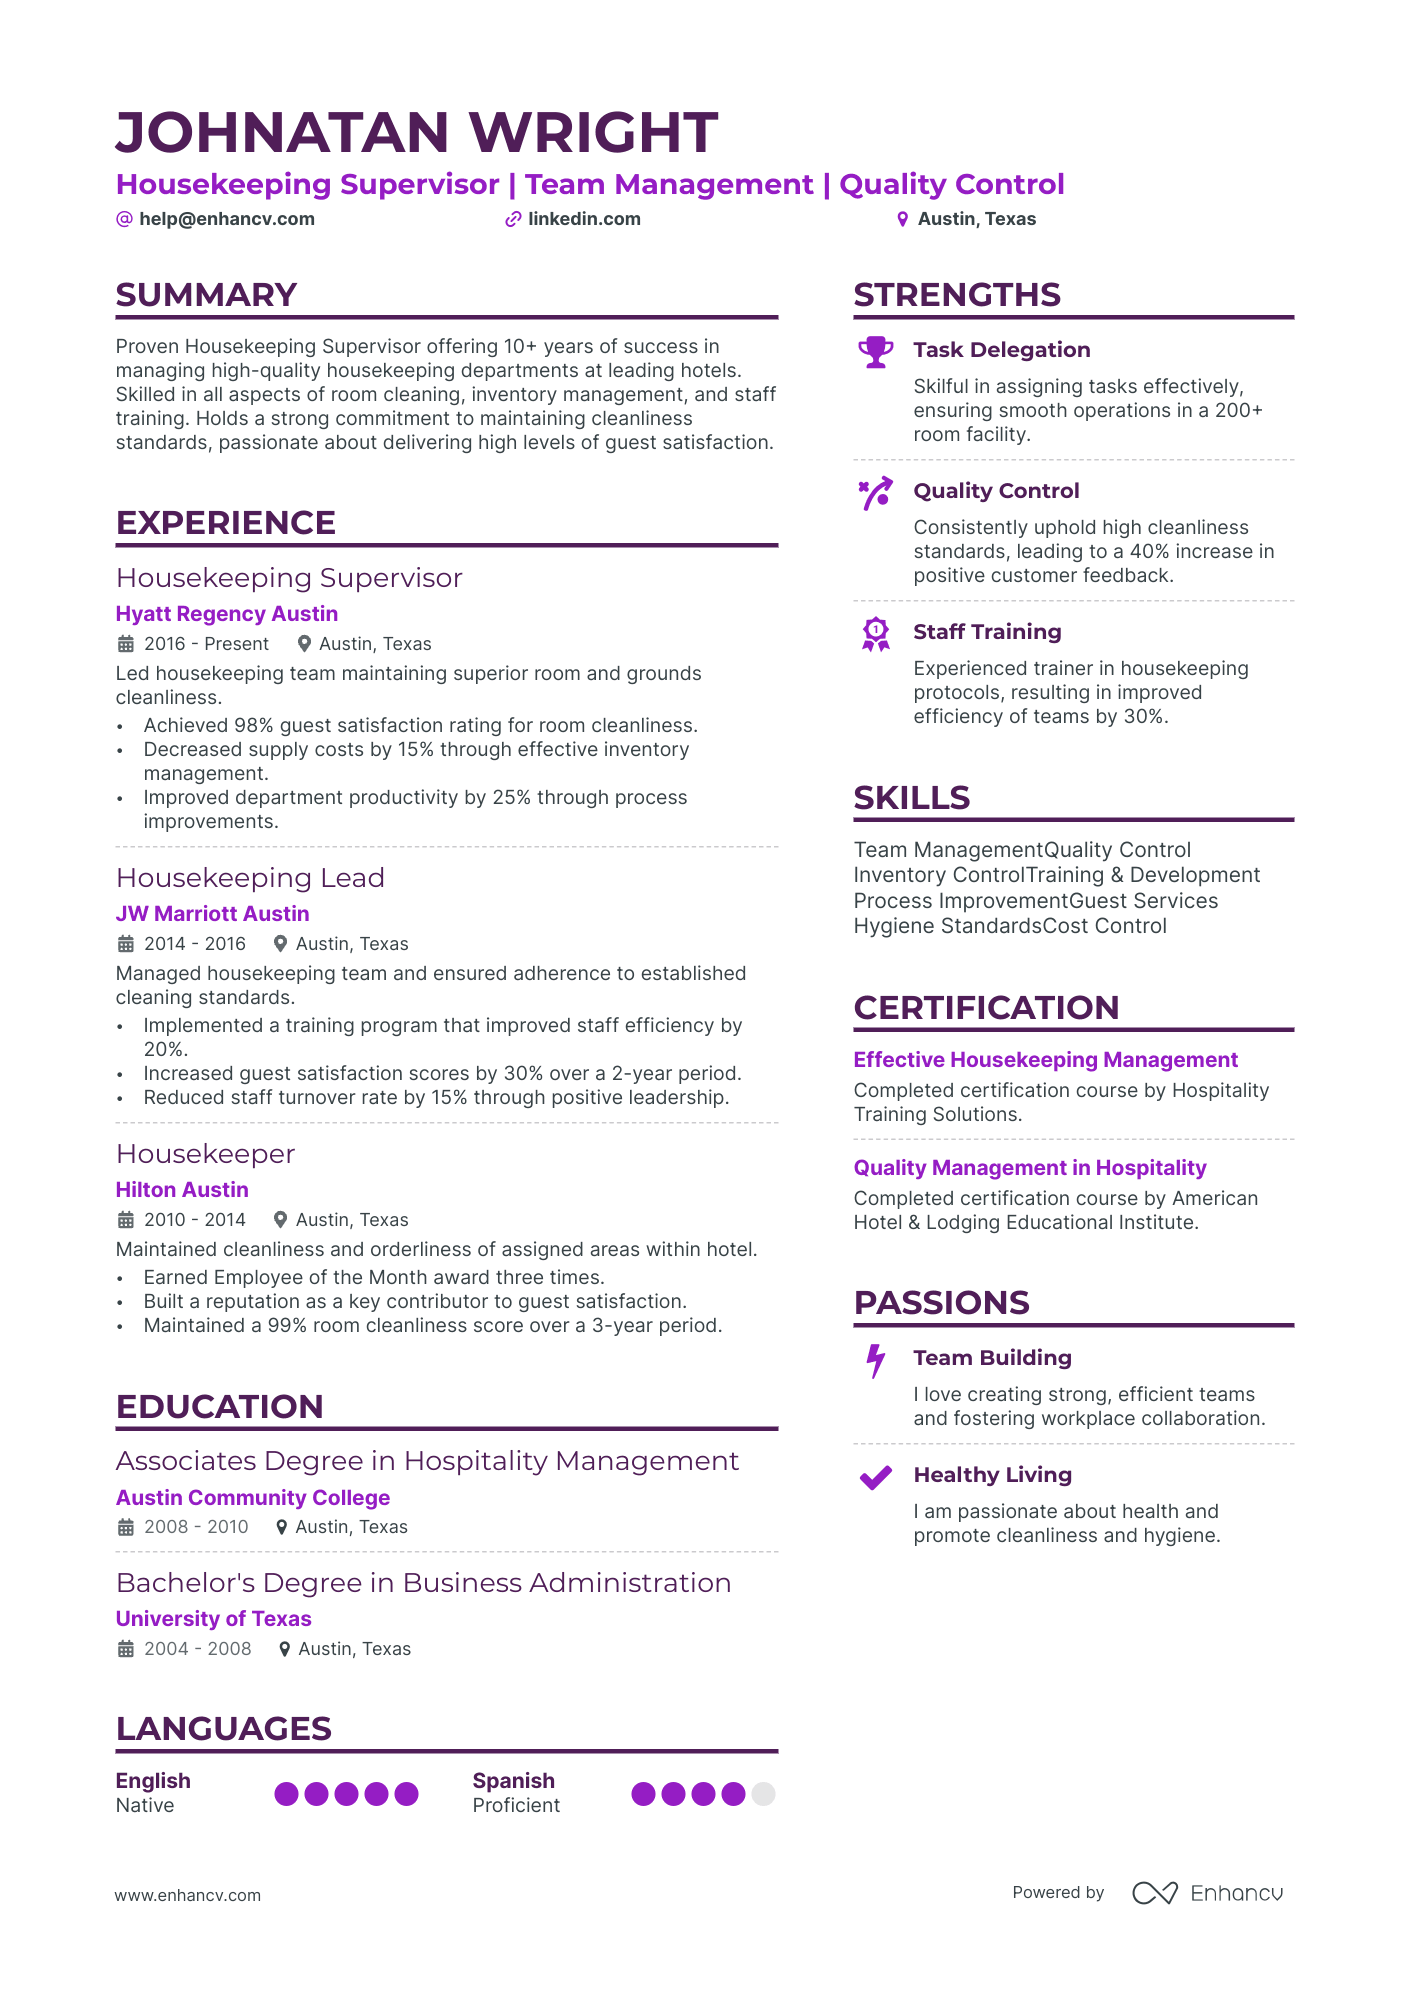 resume for housekeeper in hotel